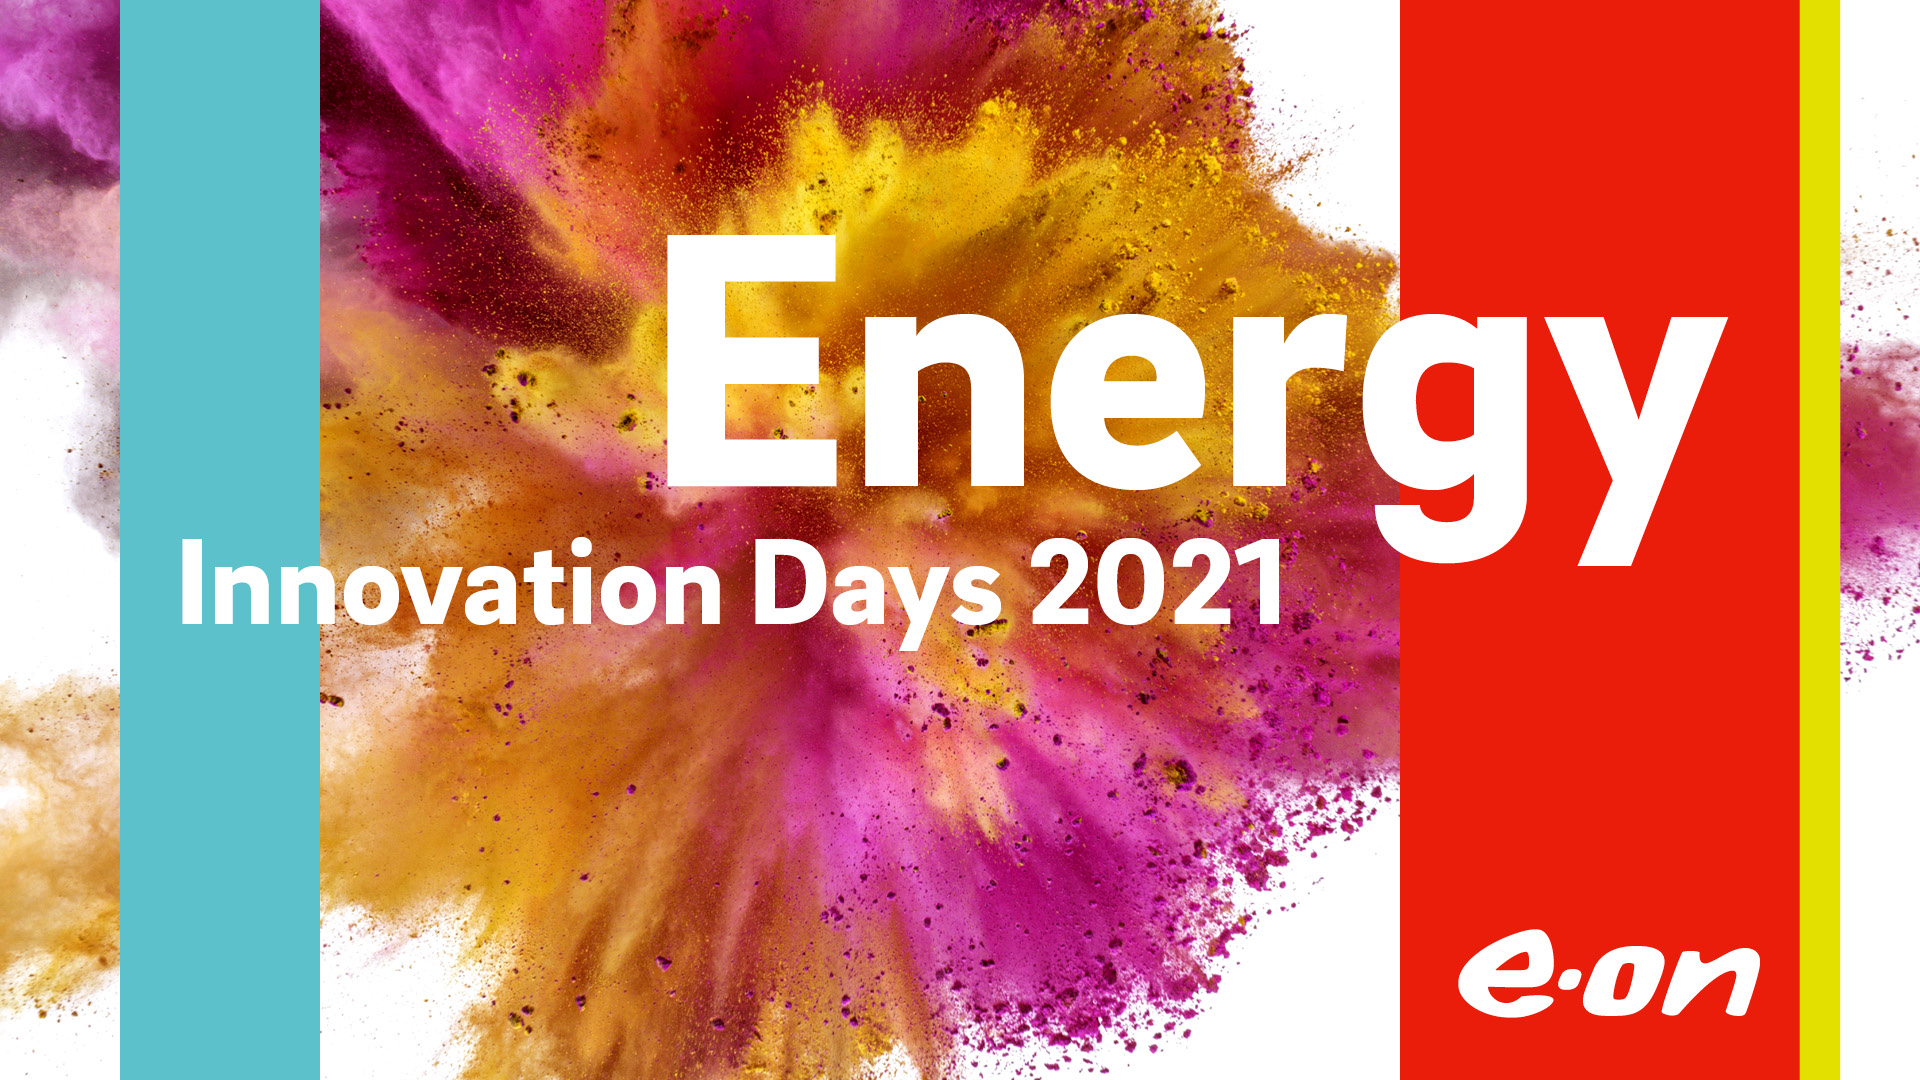 Energy Innovation Days 2021, Europe’s largest energy and innovation event